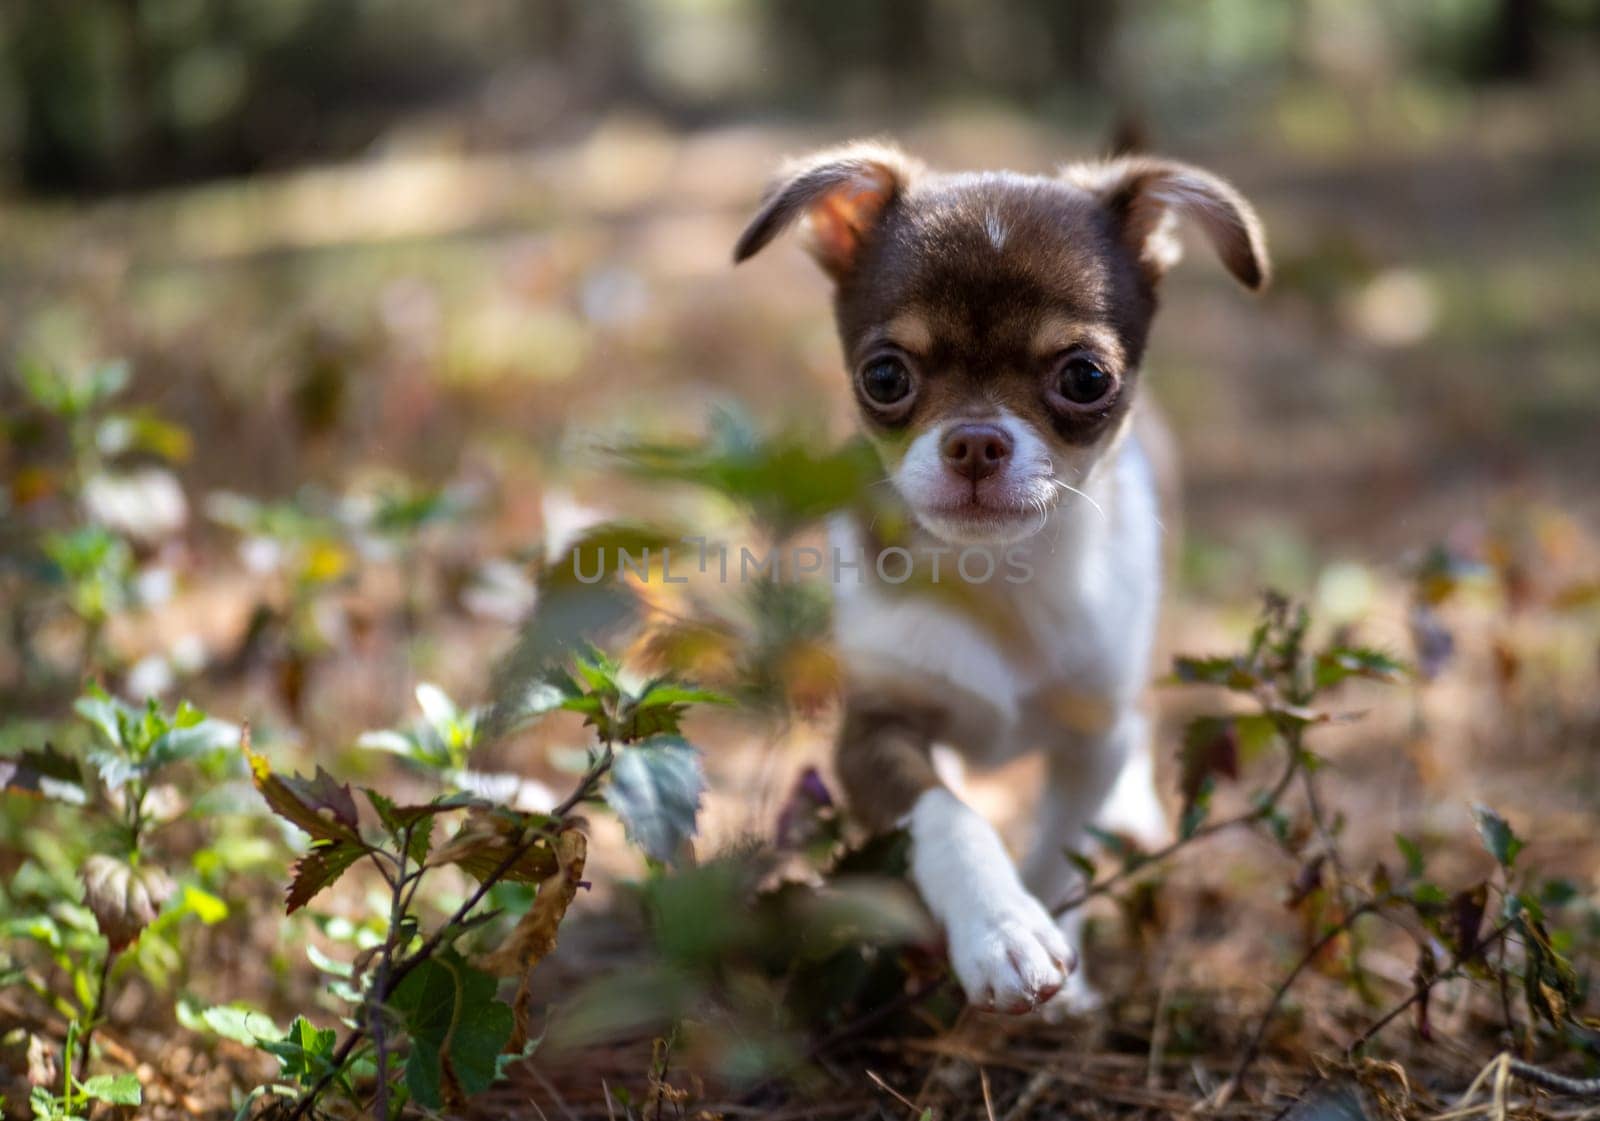 Sunny Day with a Chihuahua Puppy by gcm